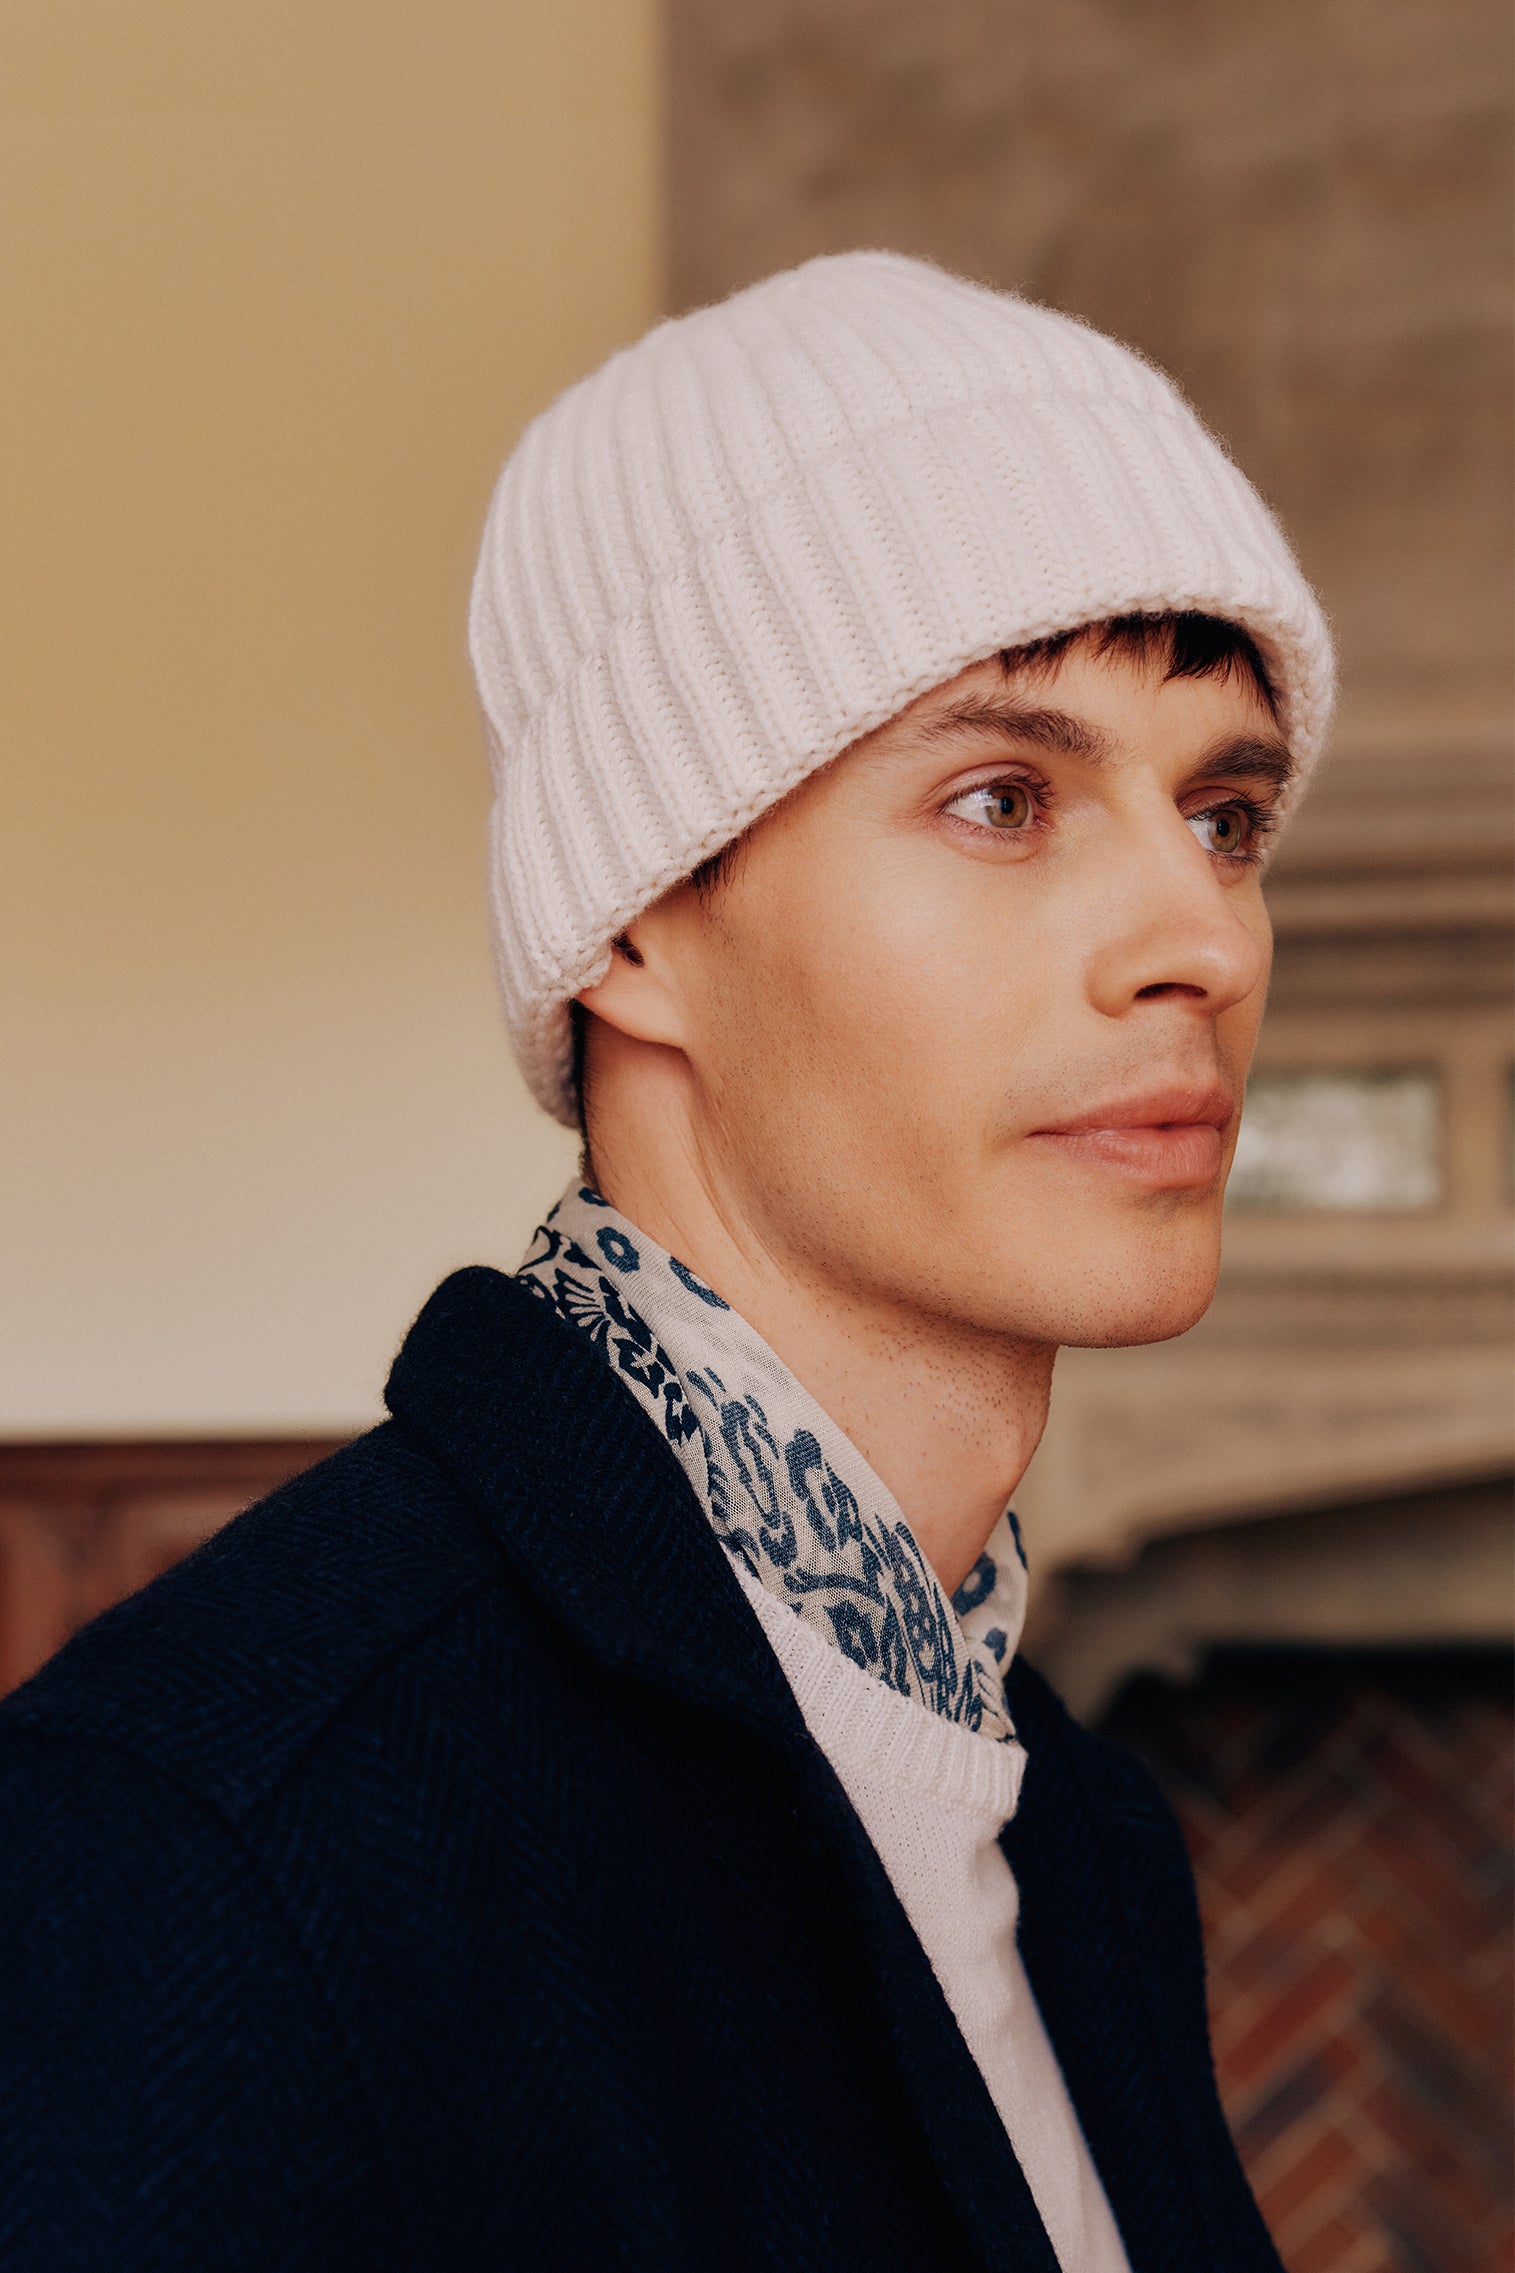 Rannoch Cream Cashmere Beanie - Hats for Oval Face Shapes - Lock & Co. Hatters London UK